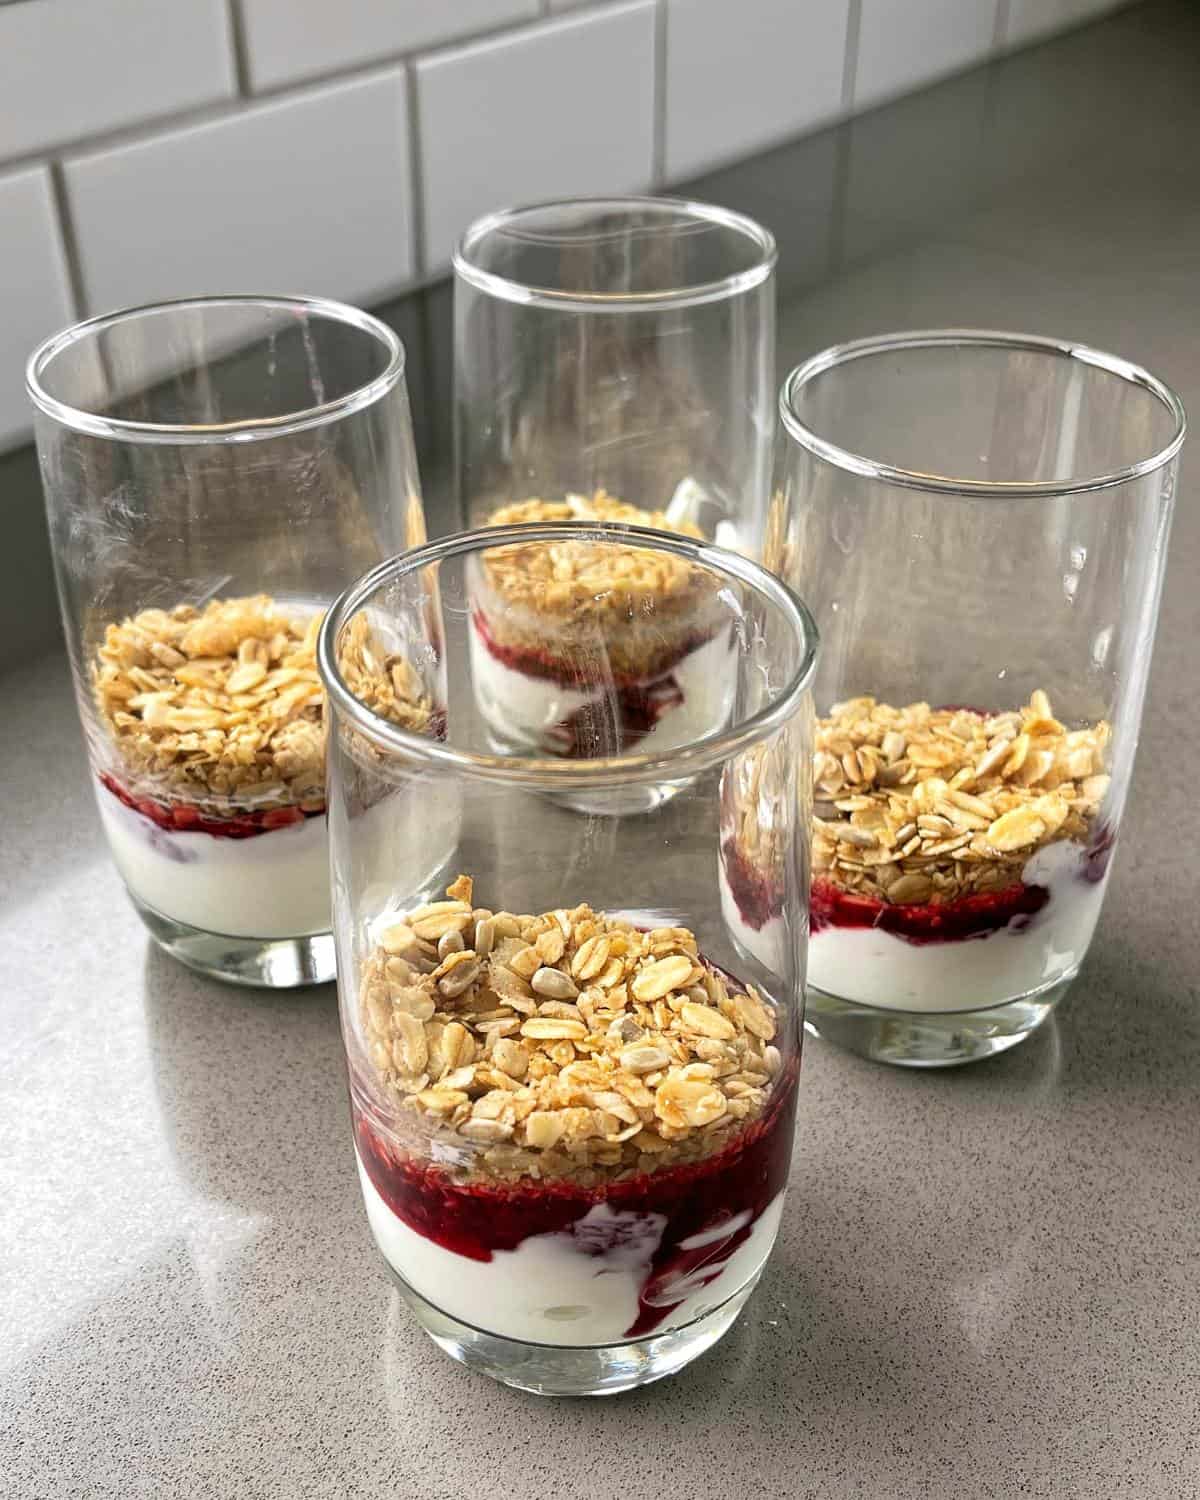 4 tall glasses layered with yoghurt, berry compote and toasted muesli on a grey bench.